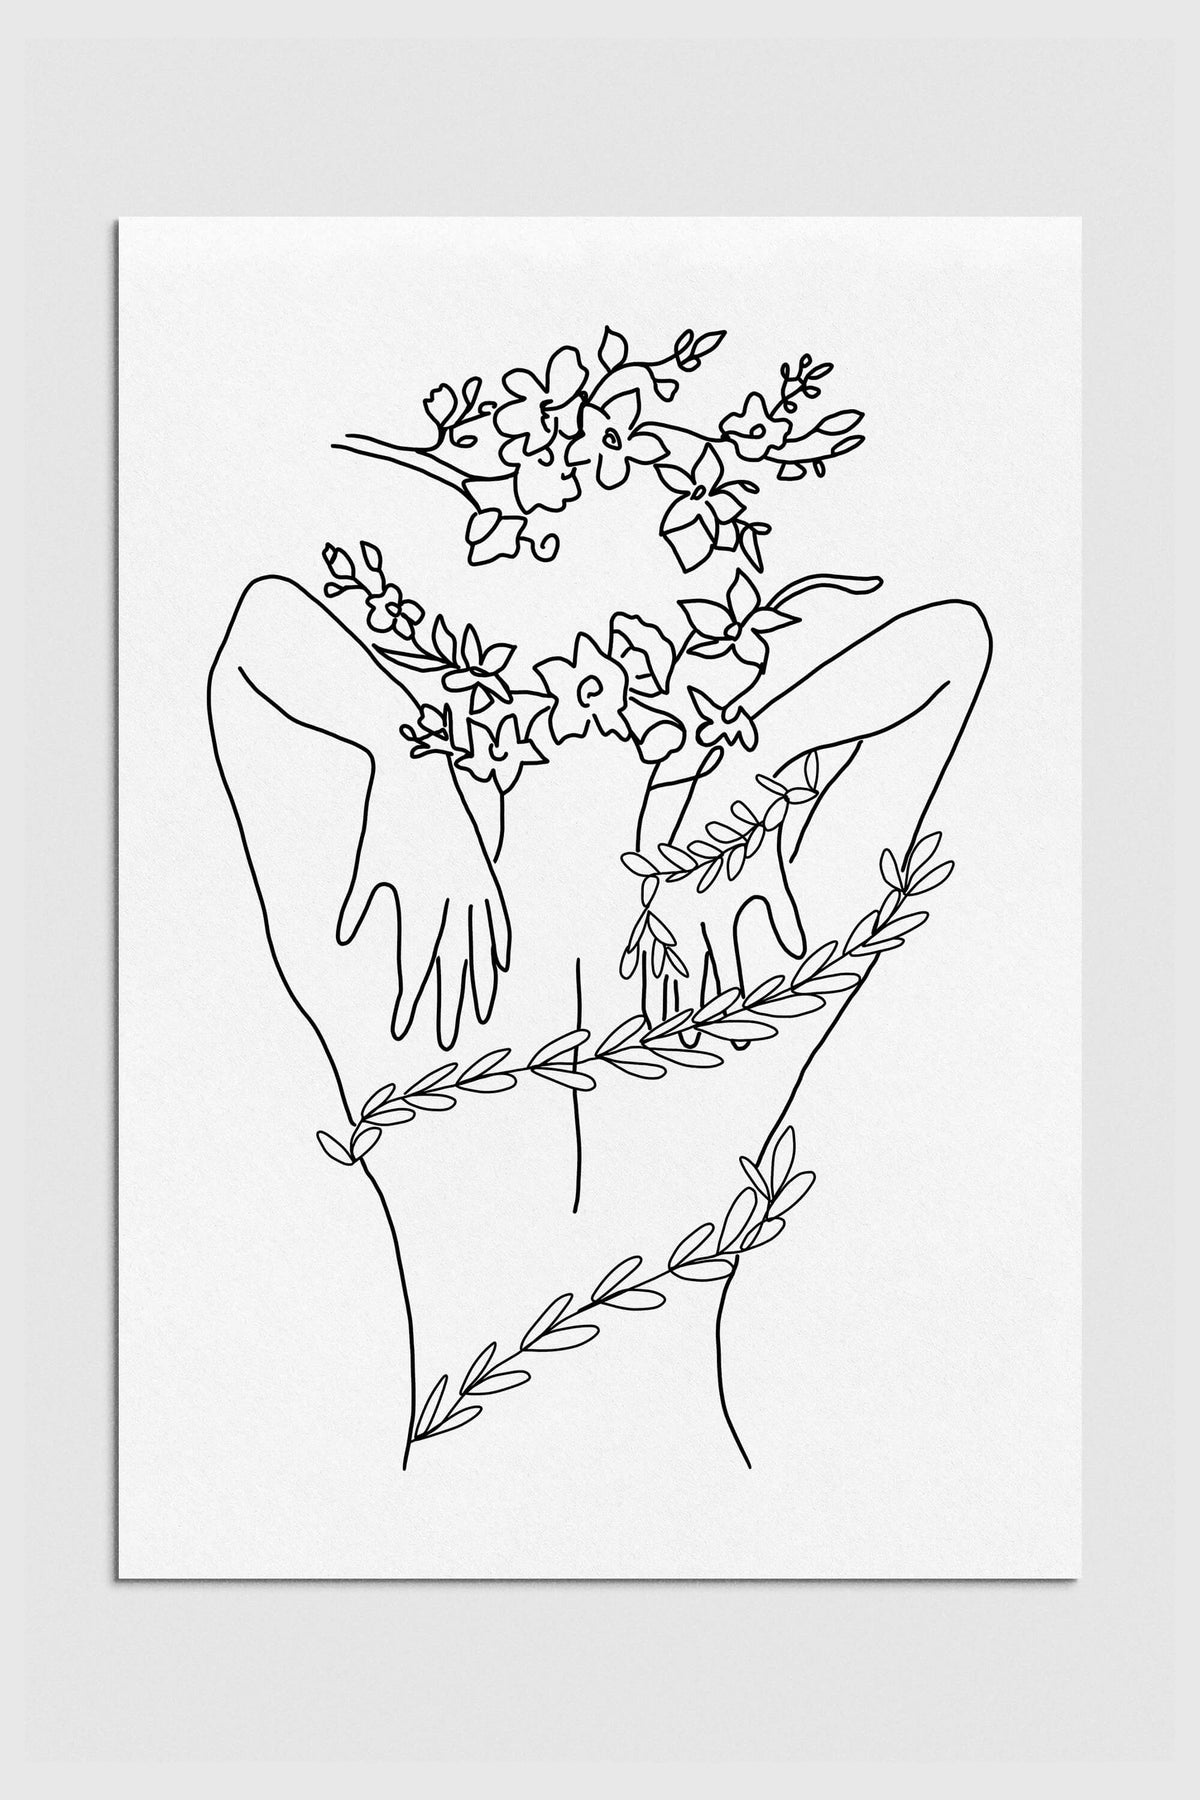 Woman's back line art poster featuring vibrant floral details on a black and white palette.